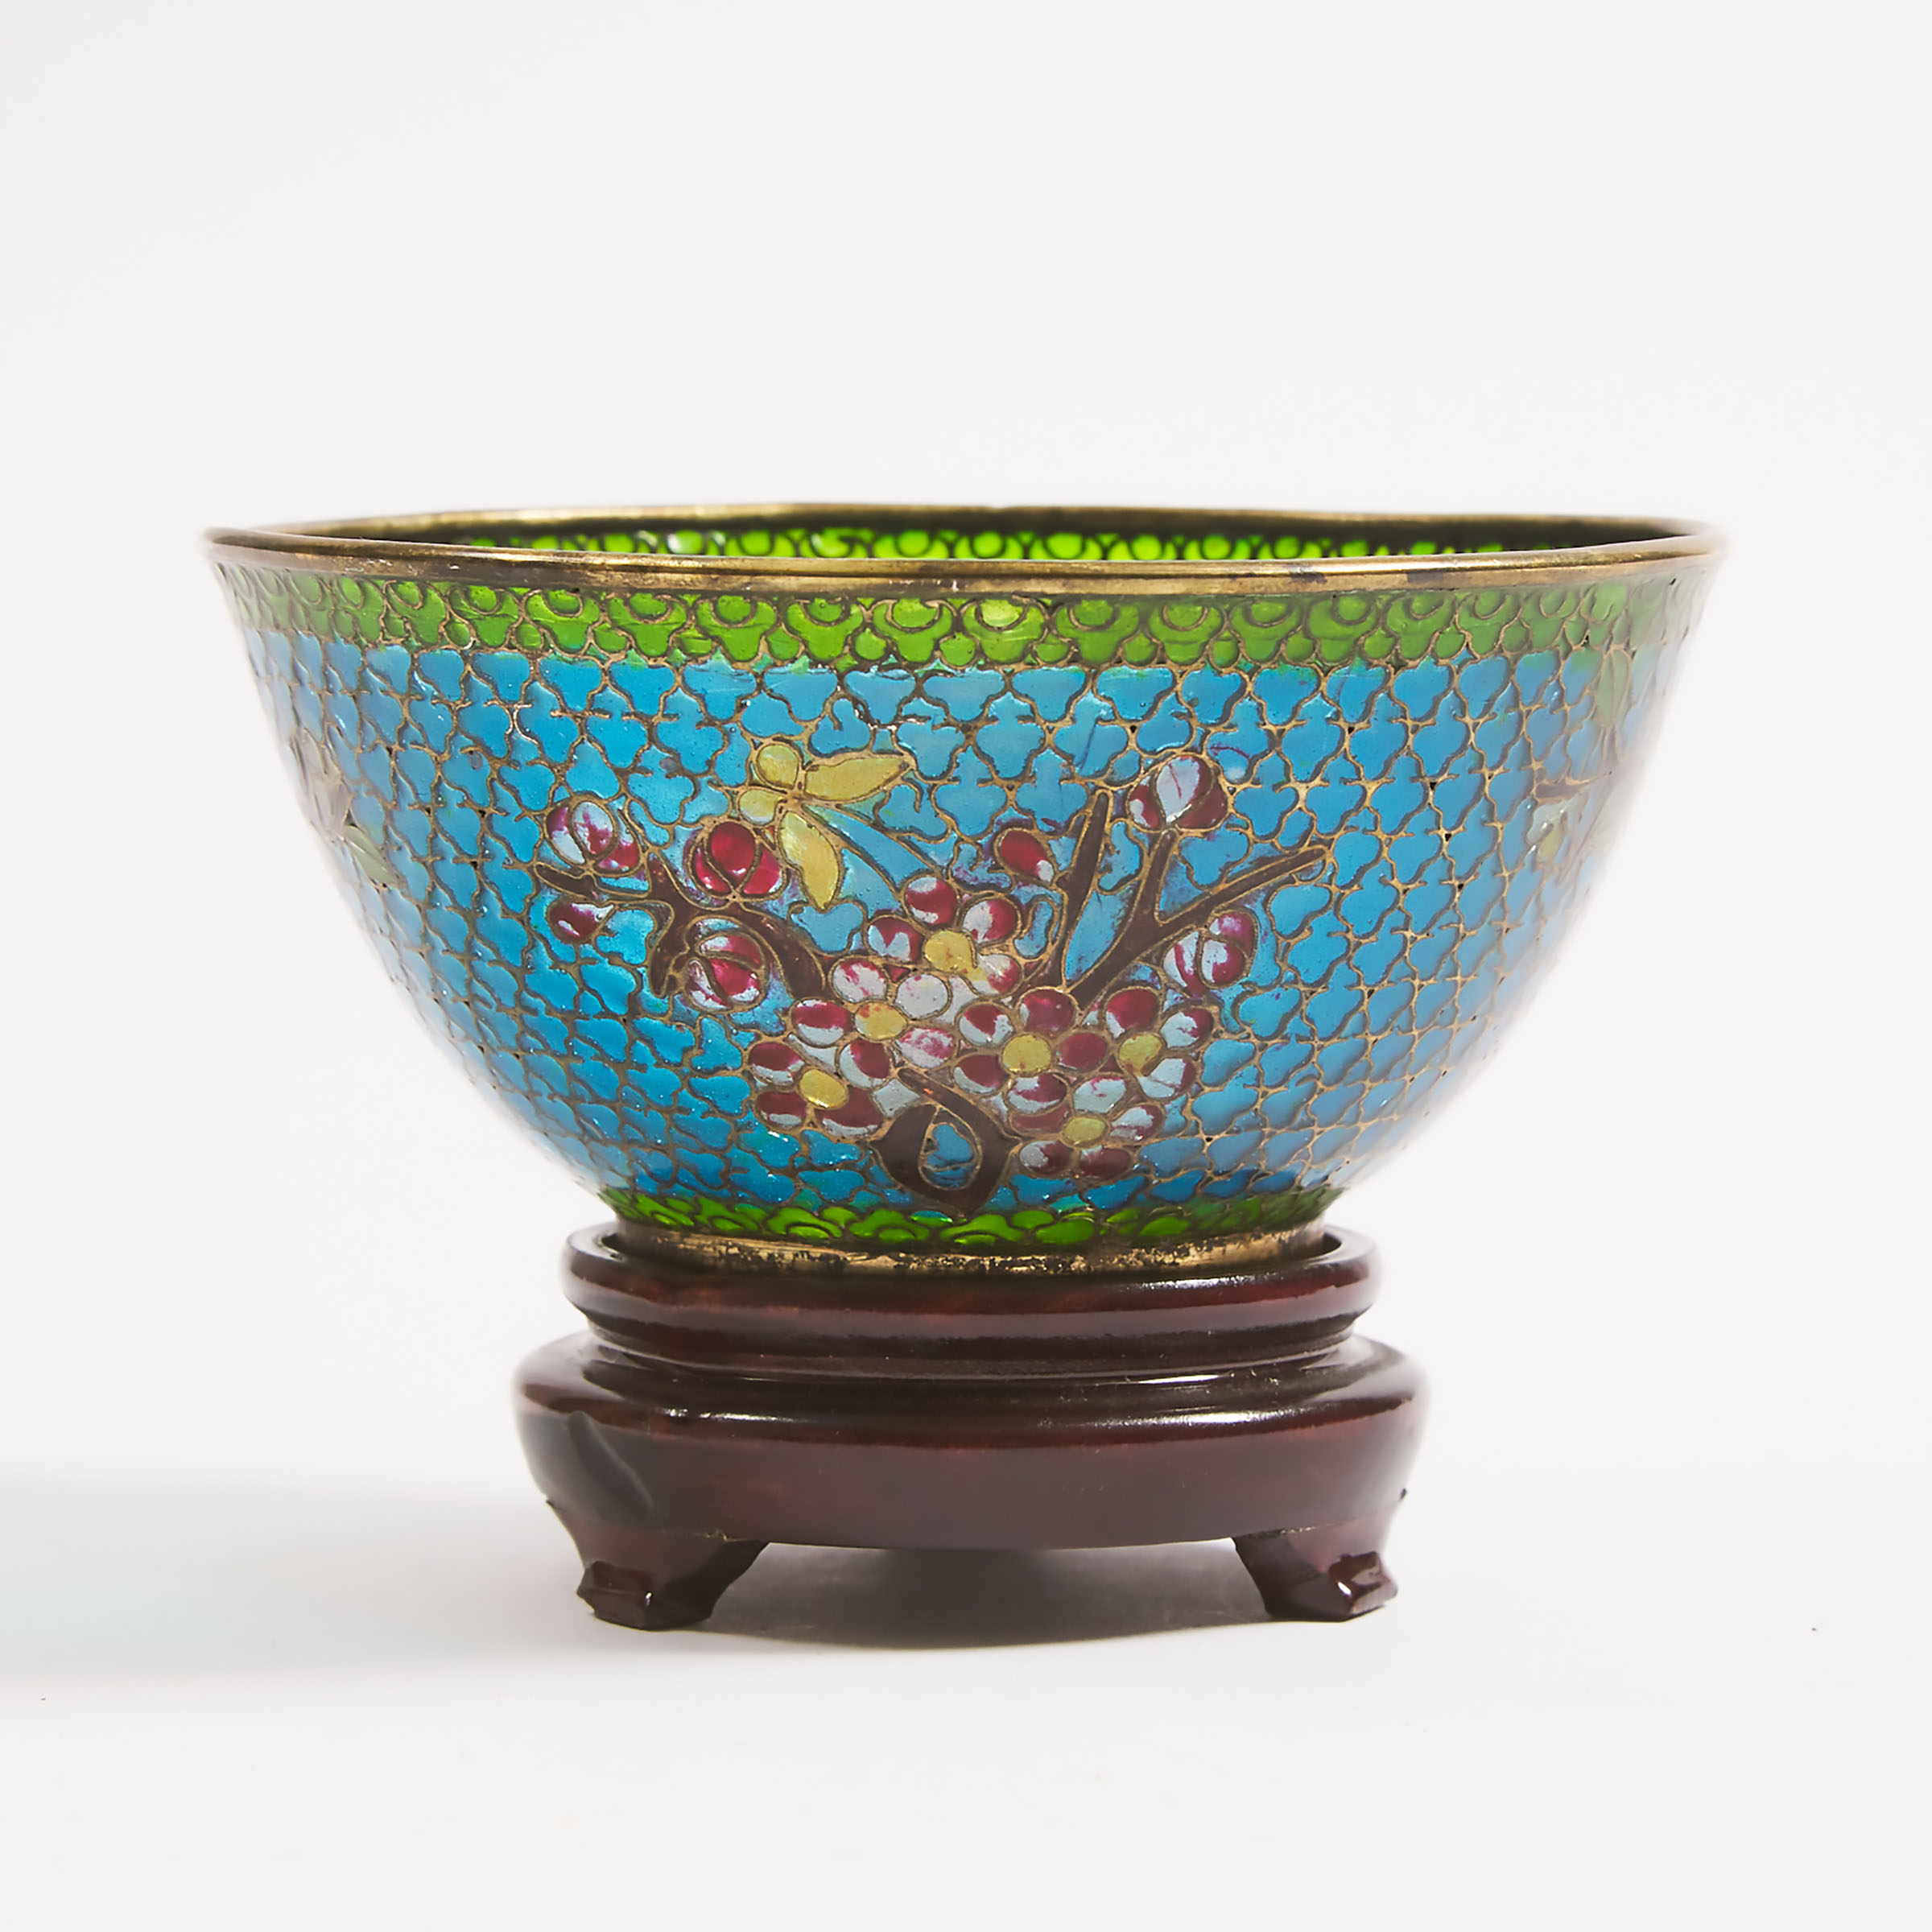 A Chinese Silver-Gilt and Plique-à-Jour Enamel Bowl, Early 20th Century